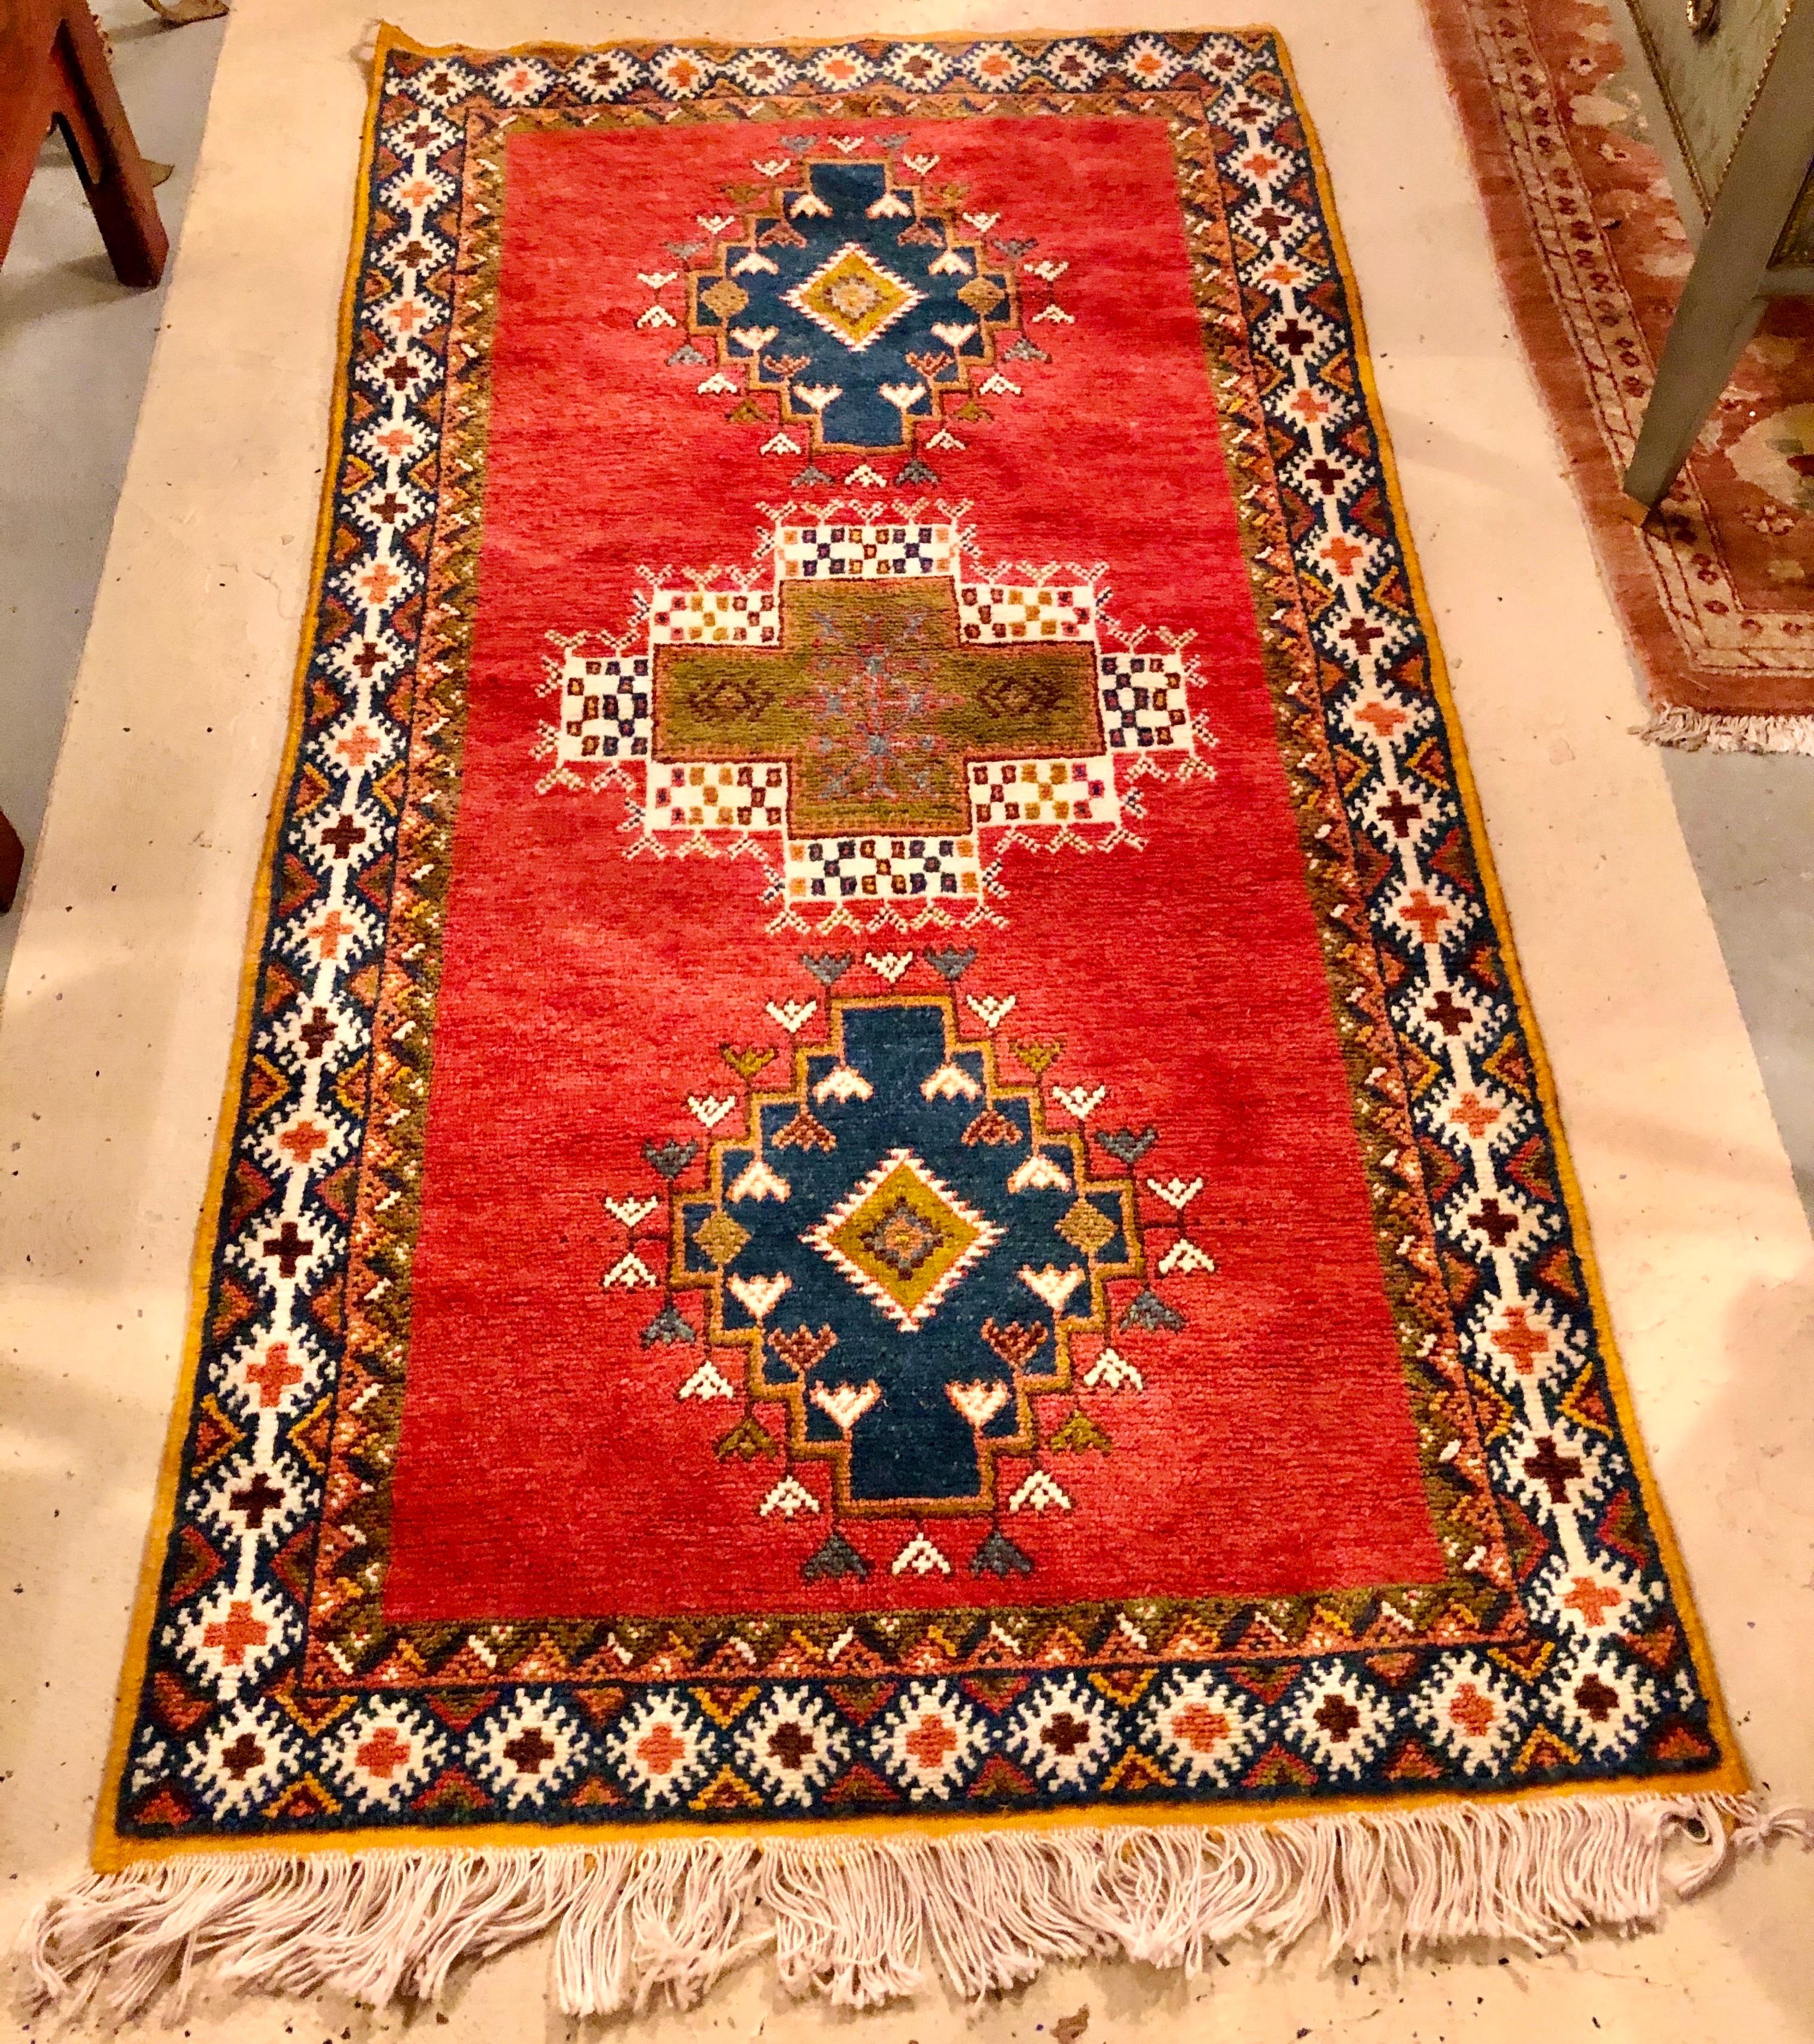 Moroccan Tribal Rug or Carpet with intricate Designs and Organic Dye. The rug is handwoven carpet by tribal women in the Taznacht region of Morocco using the highest-quality 100% sheep's wool. It features deep and vivid all-natural vegetable dyes